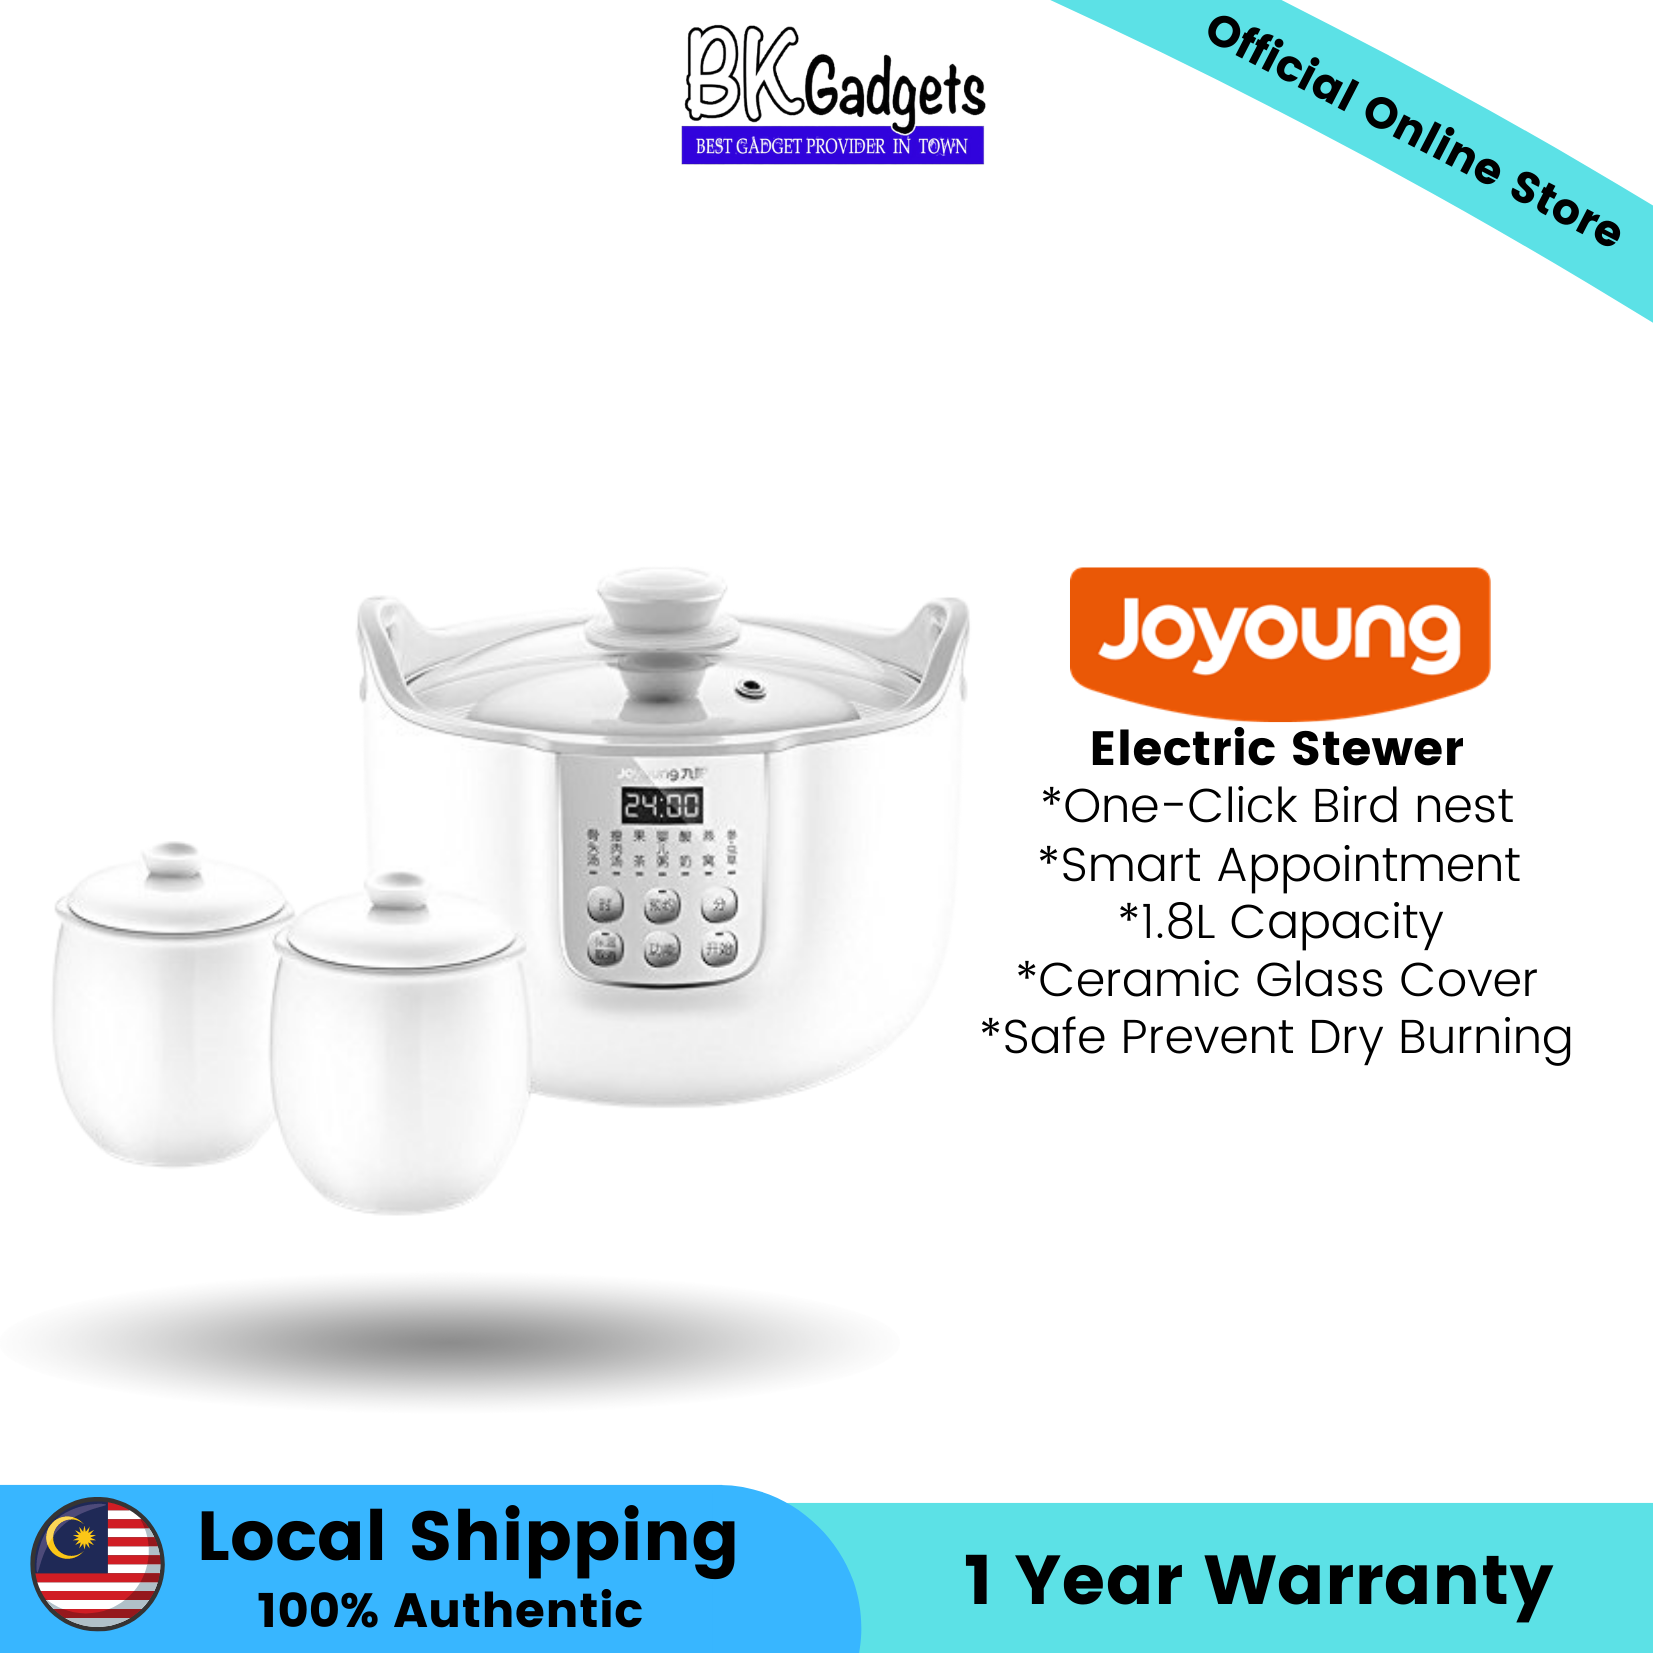 Joyoung Electric Stewer | One-Click Bird nest | 1.8L Capacity | Safe Prevent Dry Burning